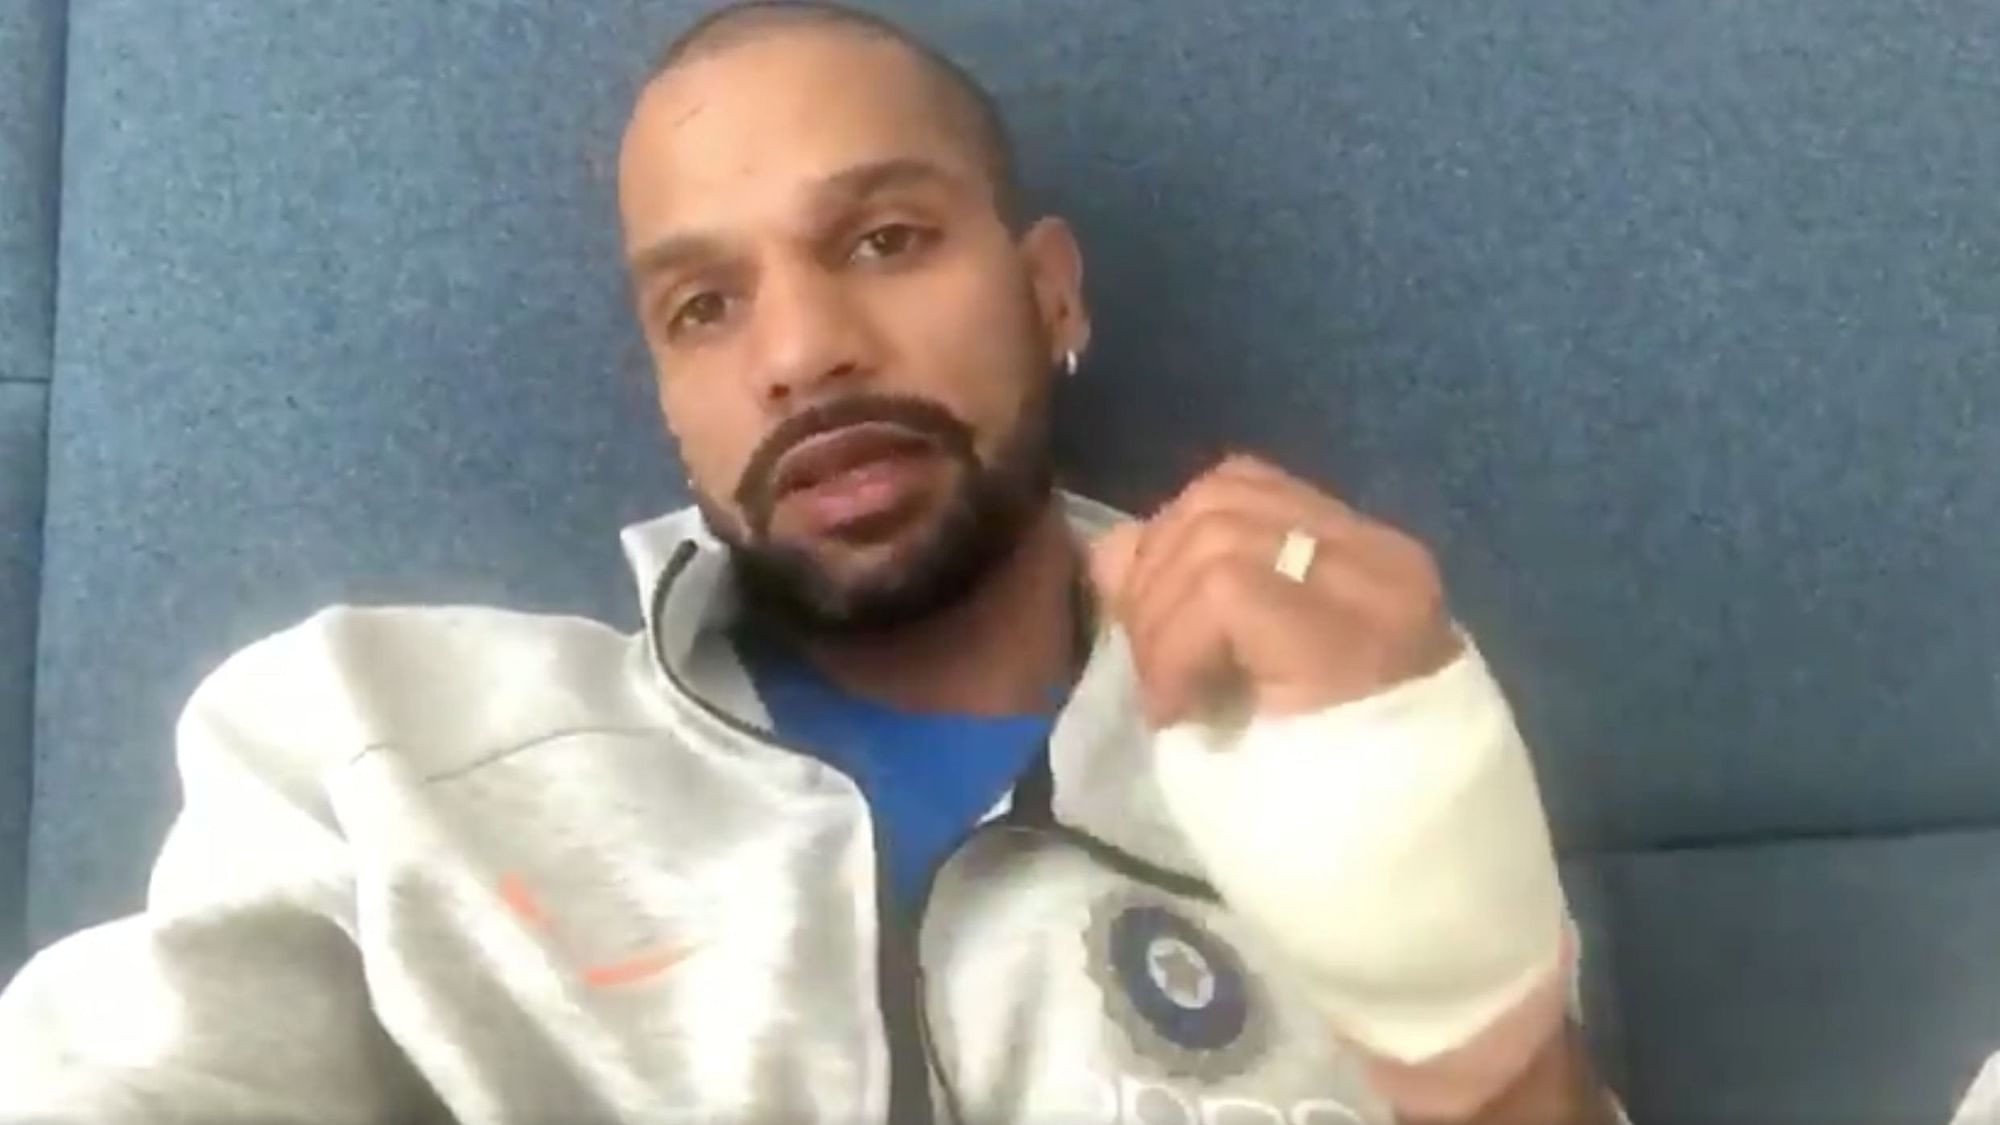 Shikhar Dhawan has posted an emotional message after being ruled out of the 2019 ICC World Cup.